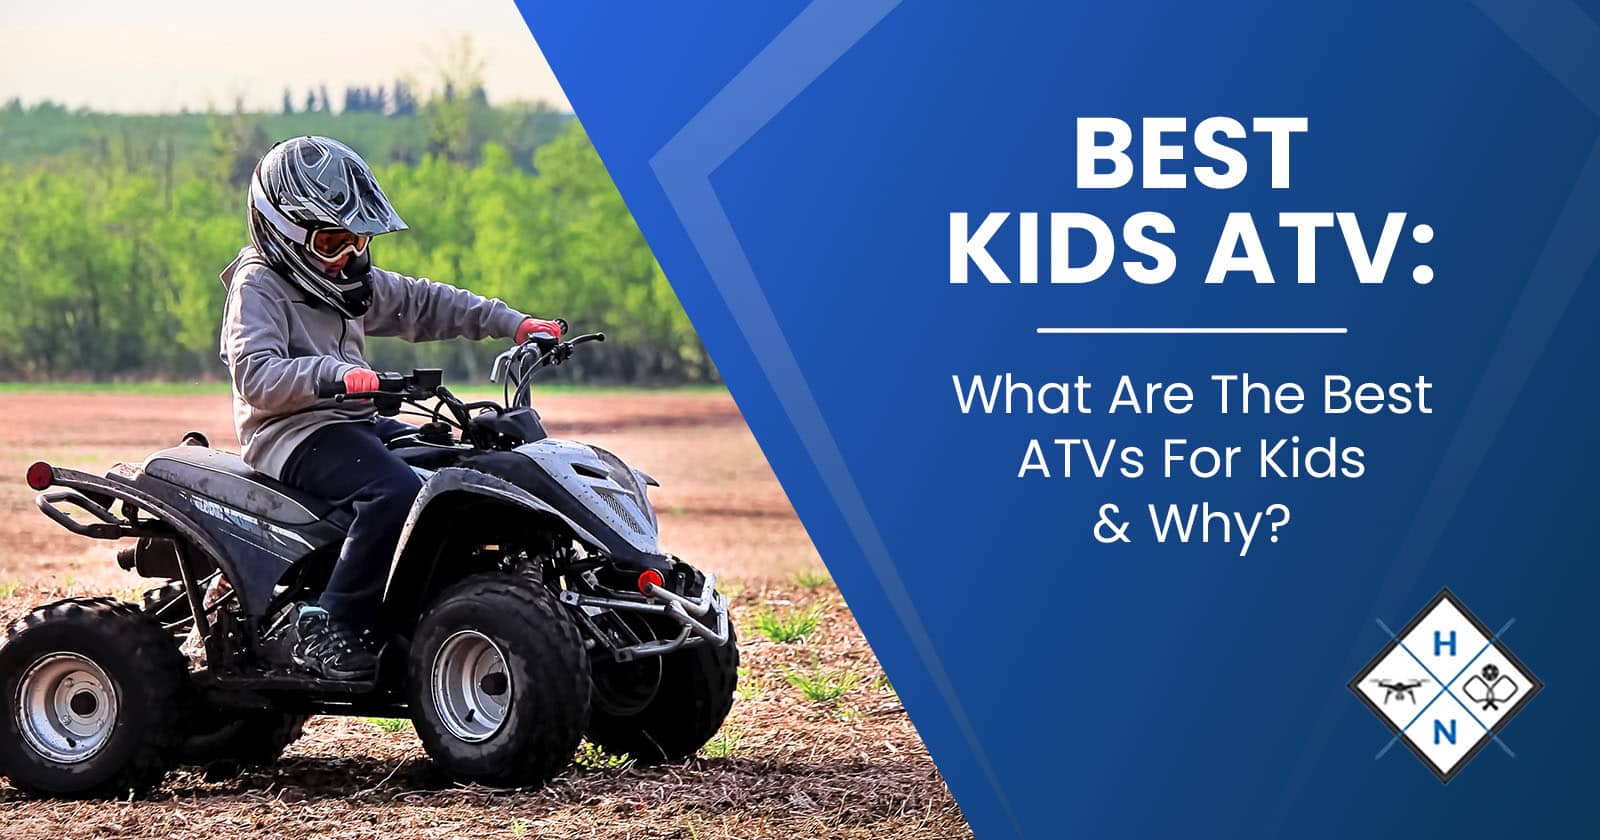 Best Kids ATV: What Are The Best ATVs For Kids & Why?